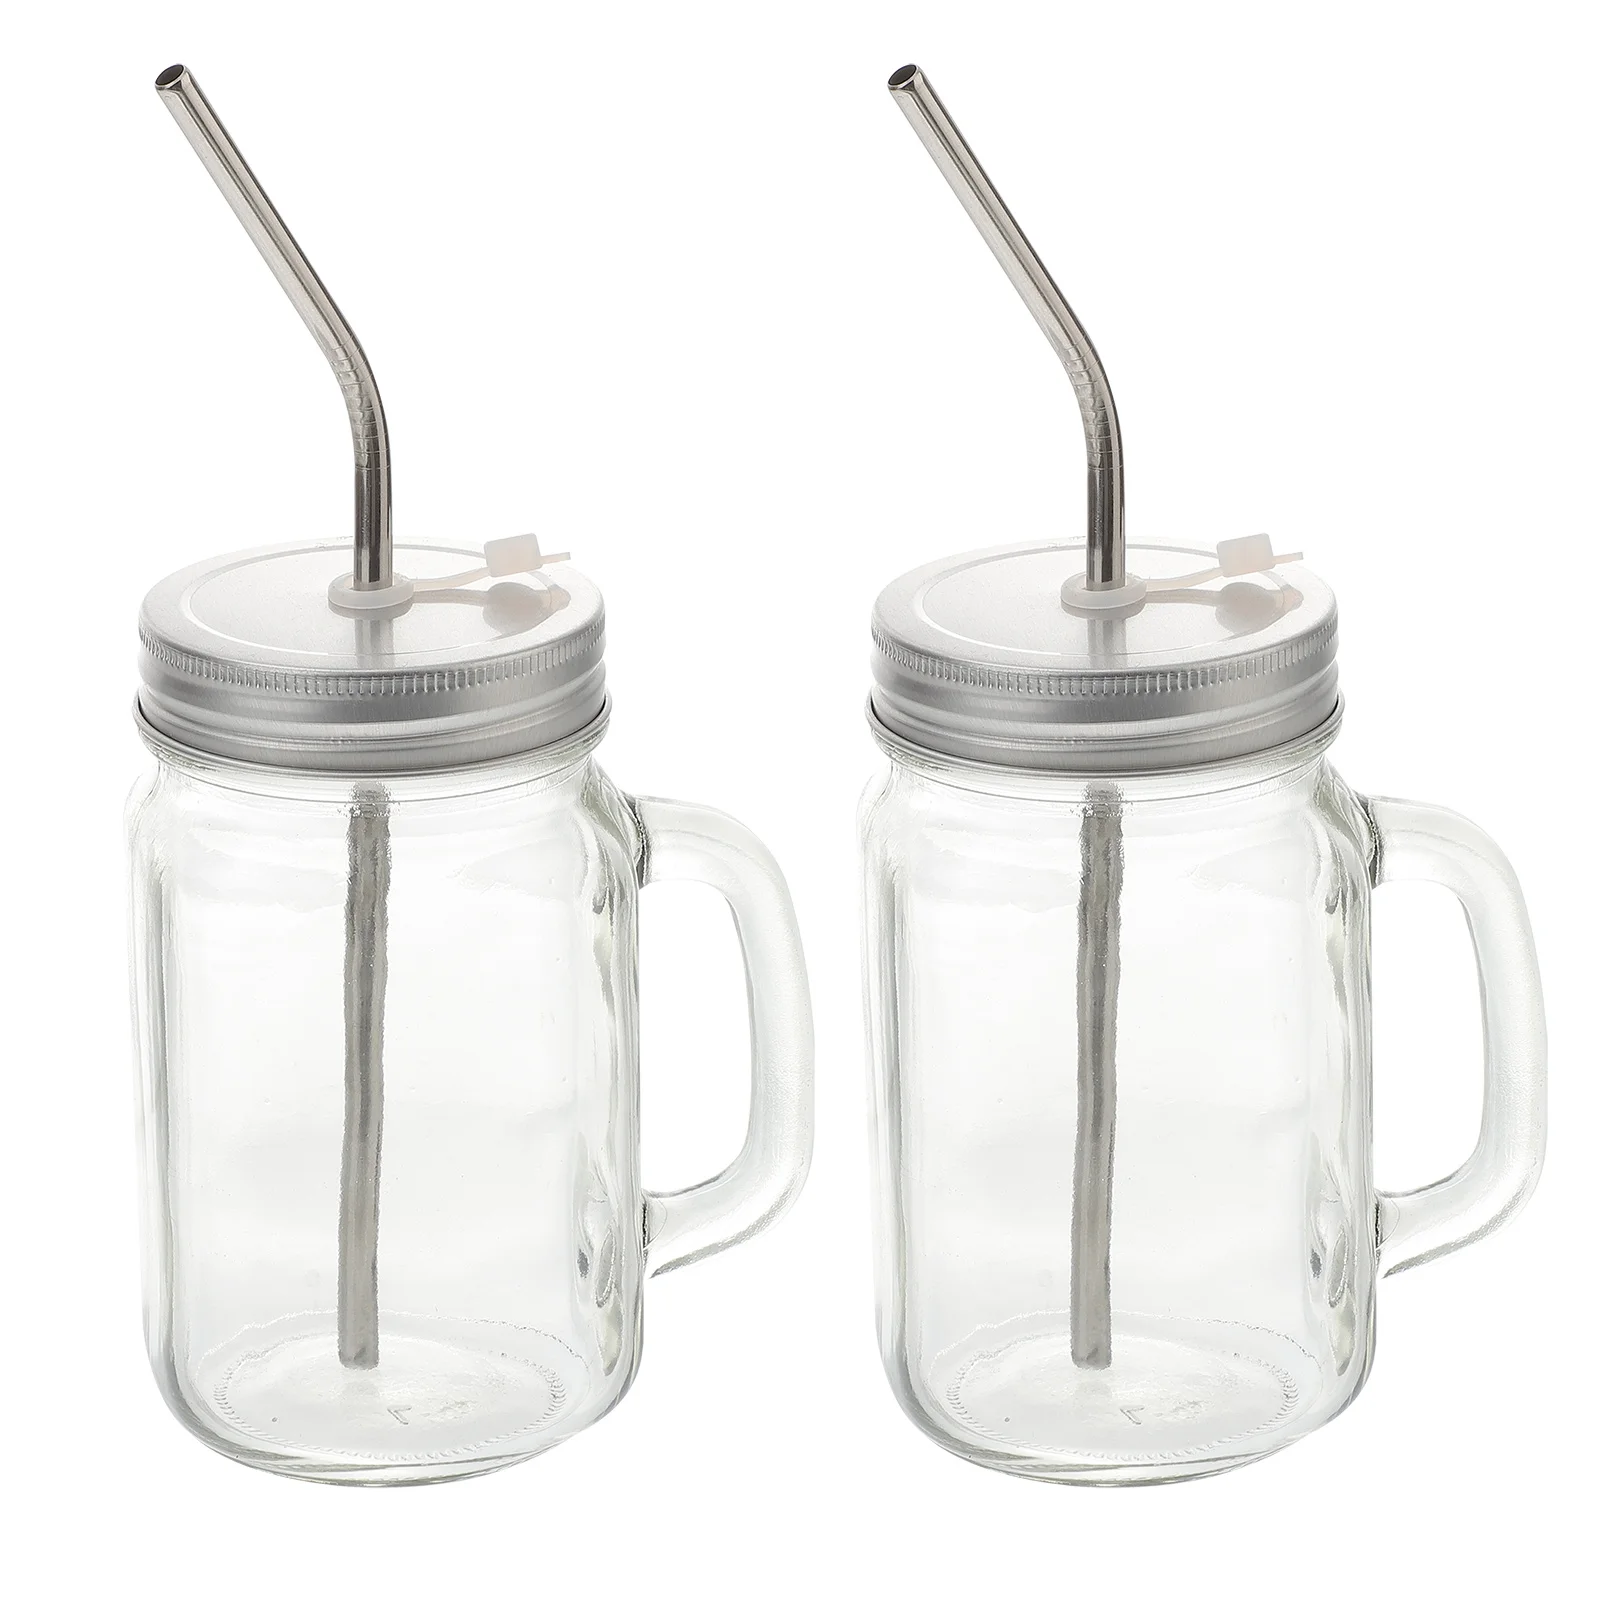 

Cup Glasswater Strawlid Coffee Cups Tumbler Jar Mason Container Drink Tea Beverage Straws Lids Functional Multi Handle Bottle